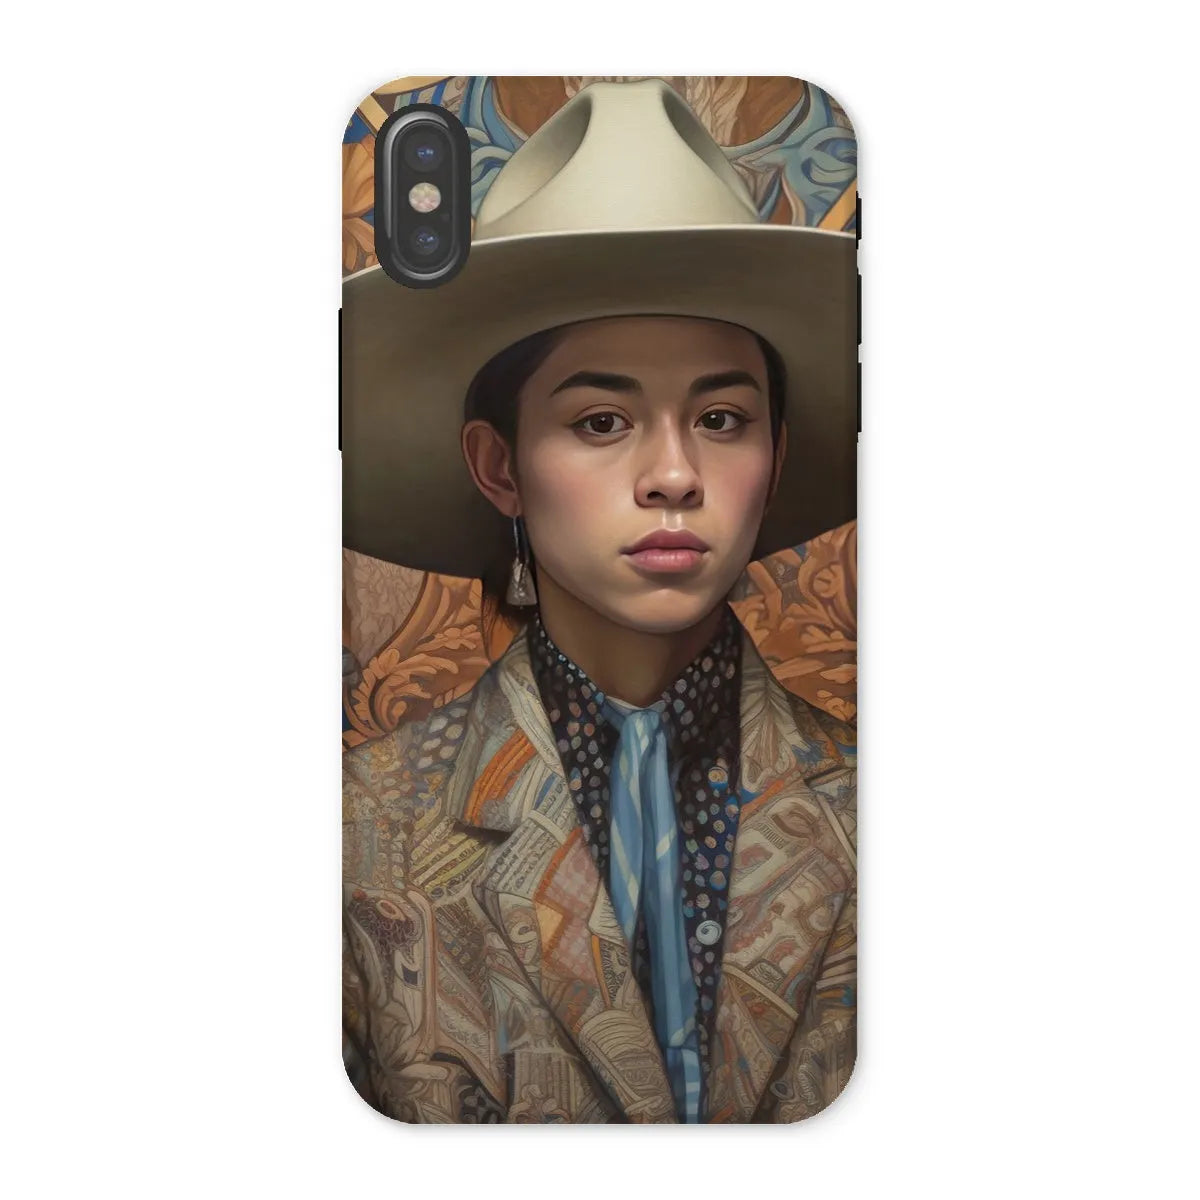 Angel The Transgender Cowboy - F2m Outlaw Art Phone Case - Iphone x / Matte - Mobile Phone Cases - Aesthetic Art